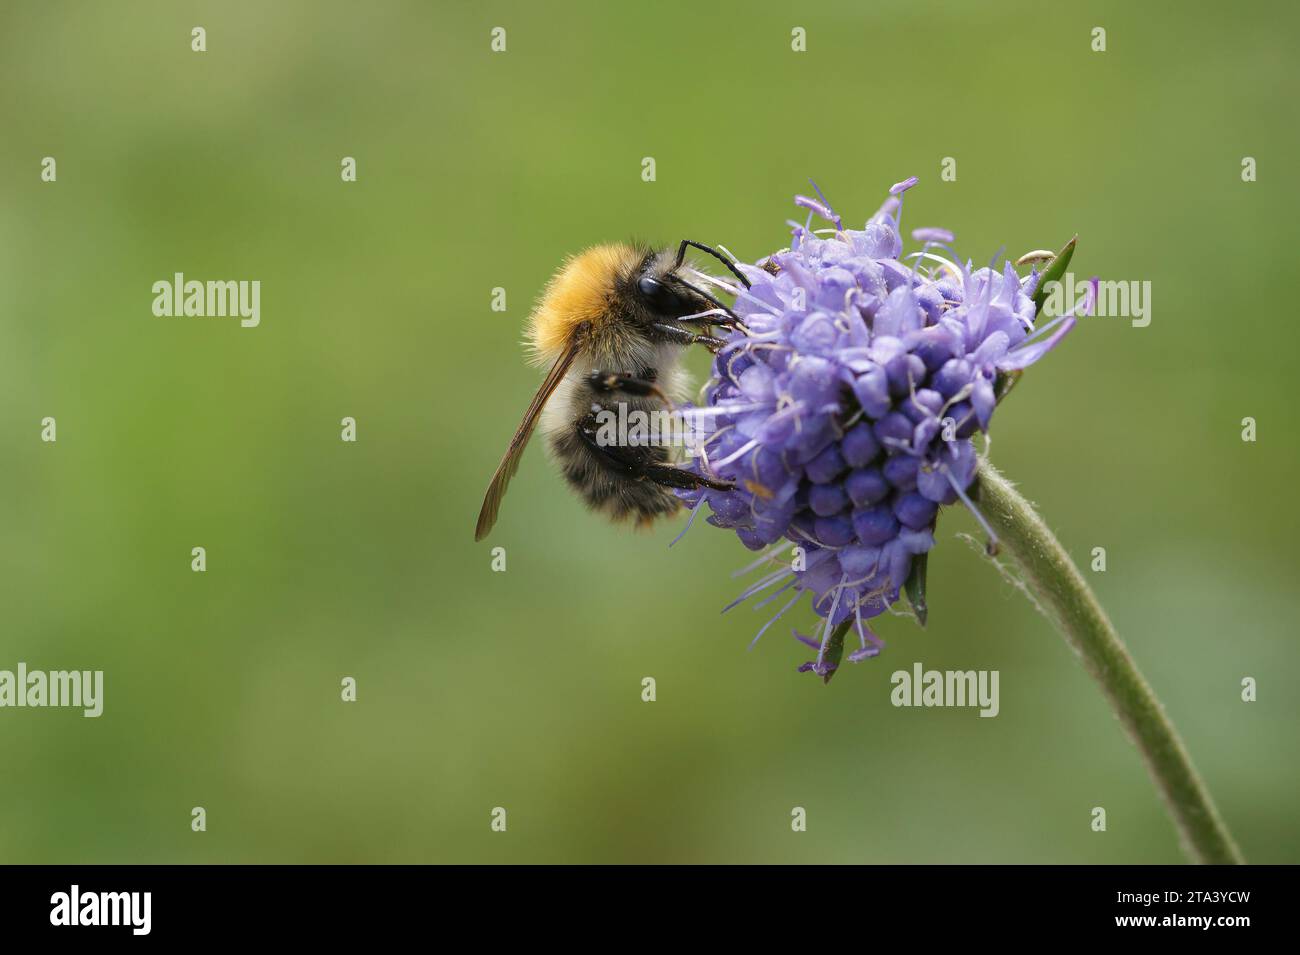 Colorful closeup on a brown banded bumblebee , Bombus pascuorum, sitting on a blue flower on a green background Stock Photo